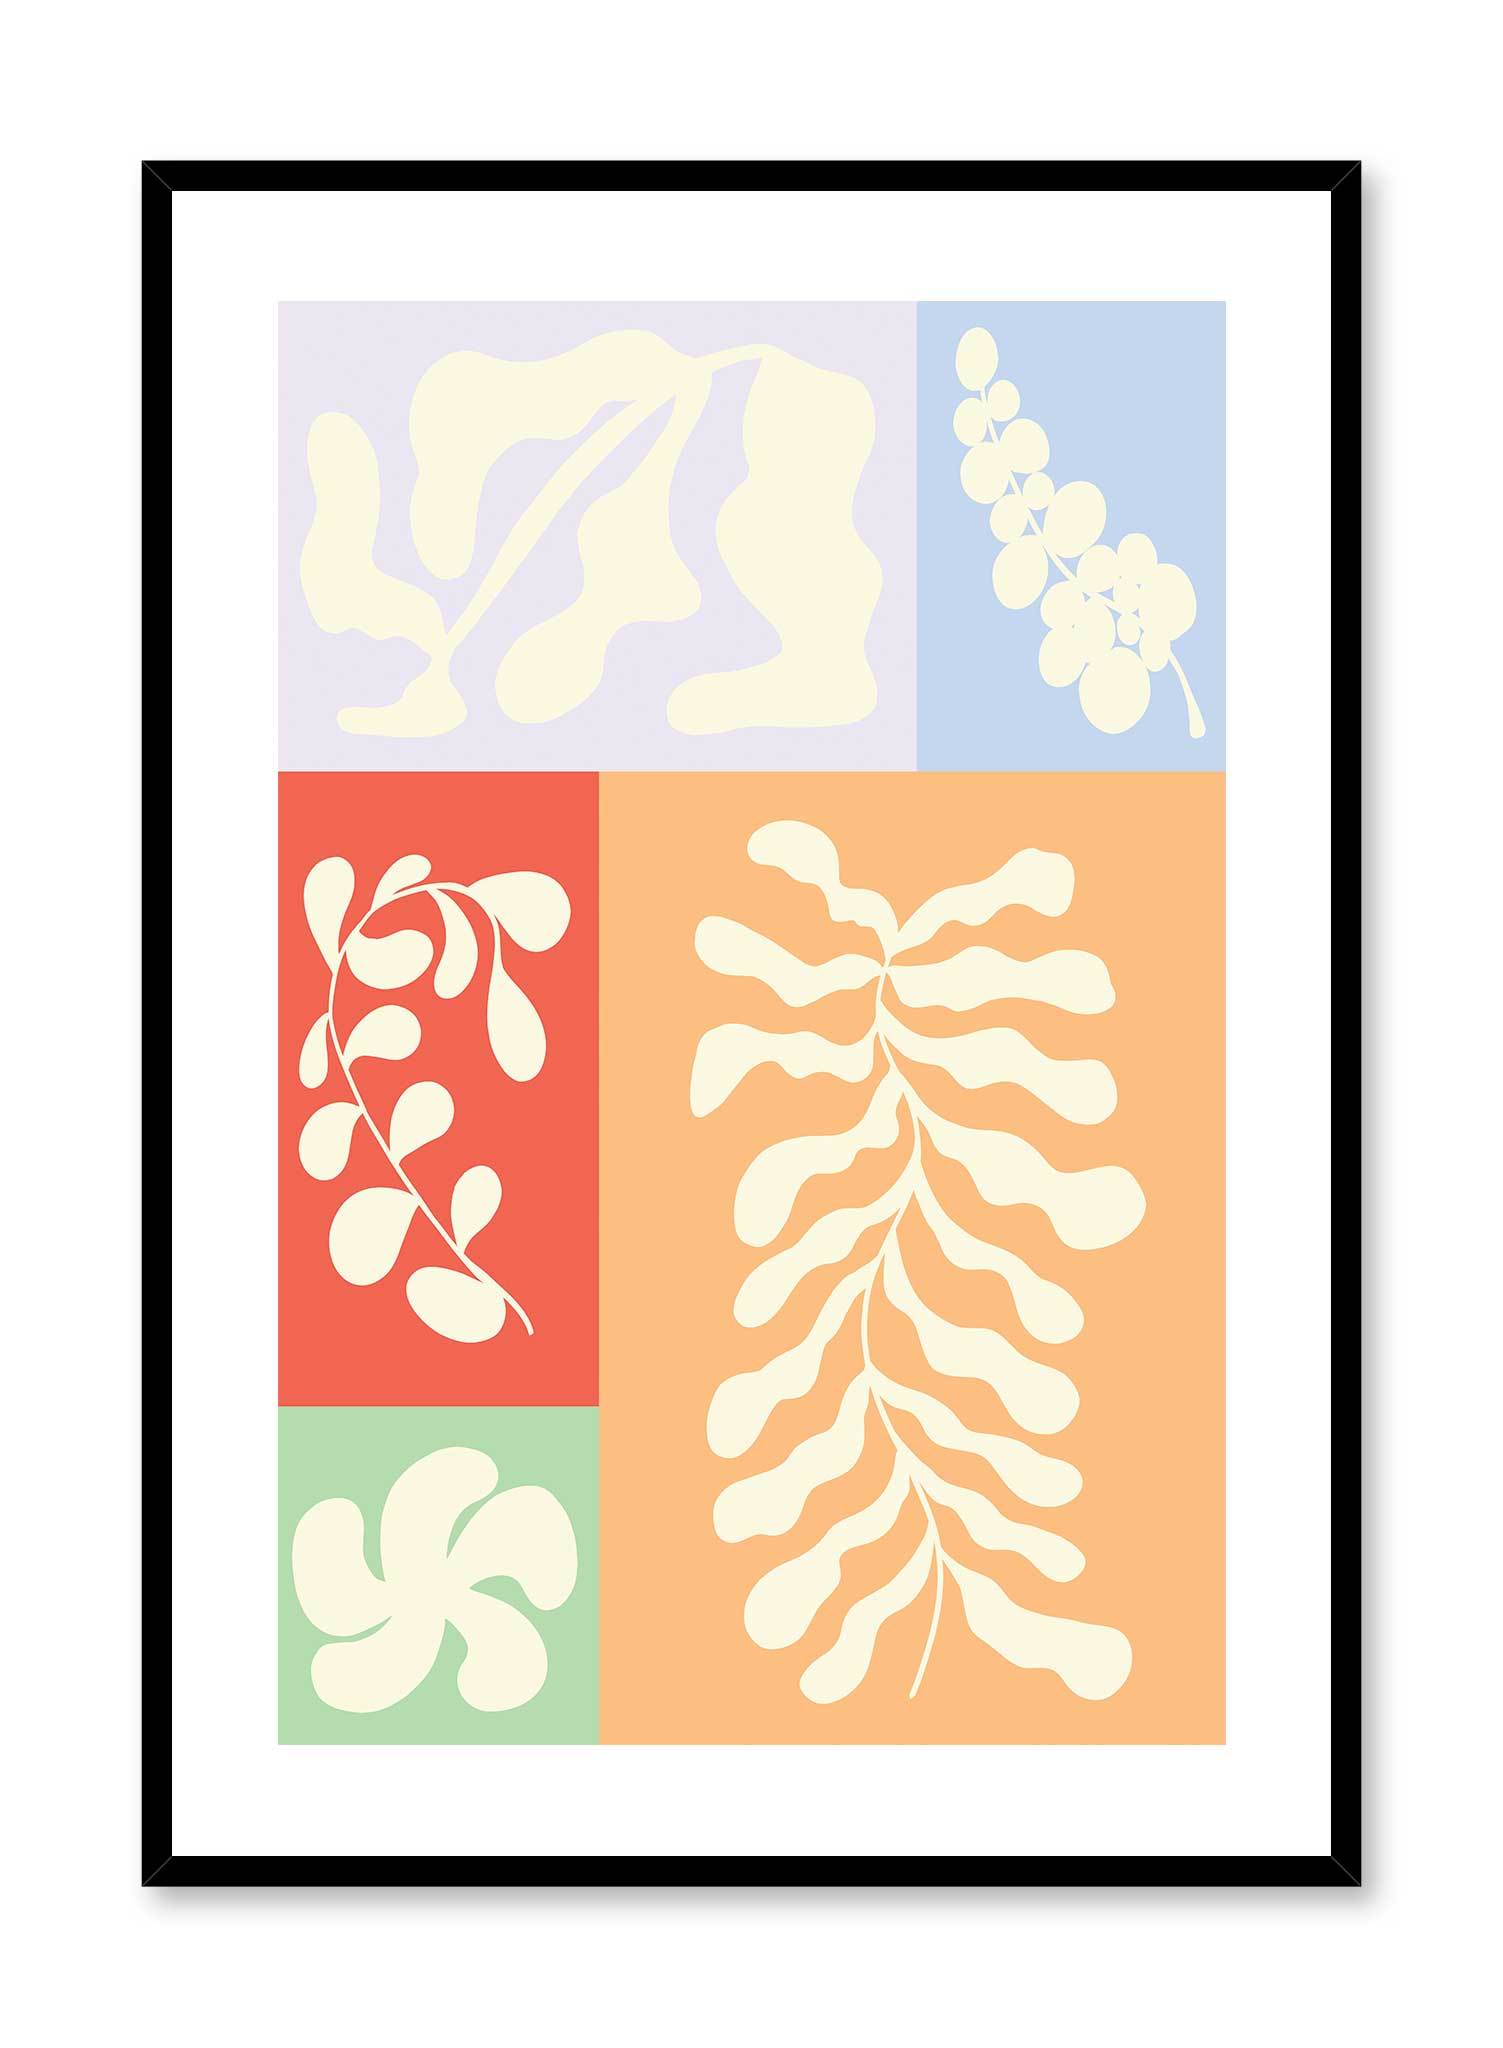 The Leafy Bunch is a vector illustration of a collection of different leaves inside colourful rectangles by Opposite Wall.